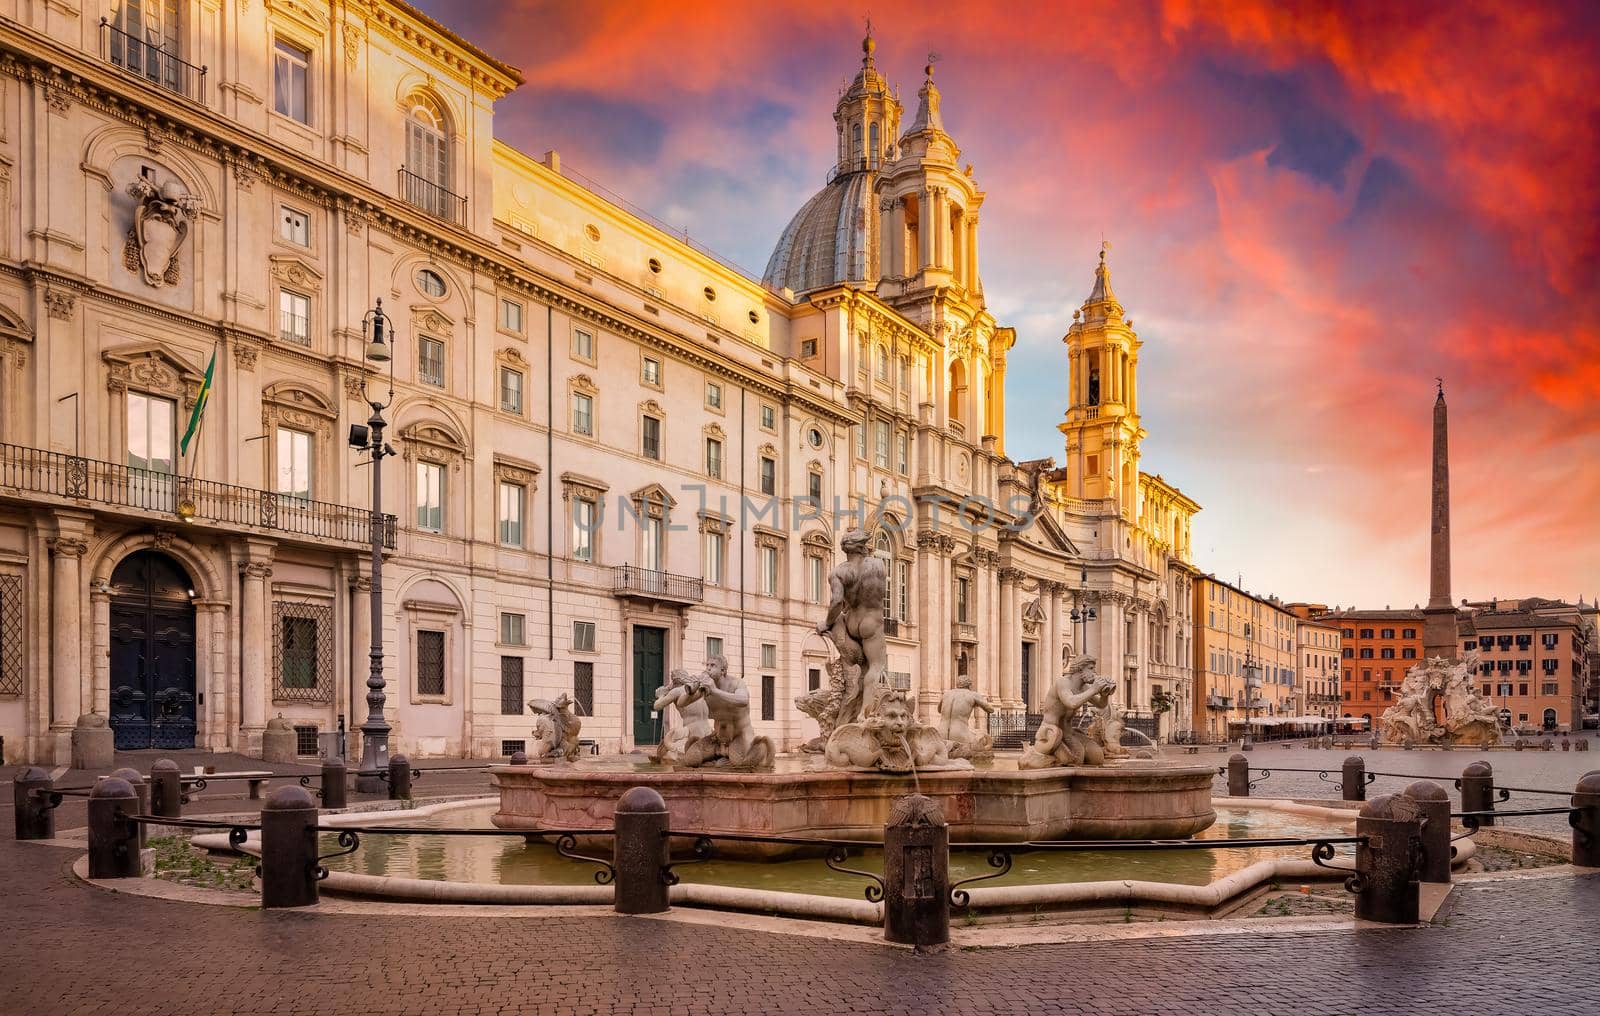 Piazza Navona at sunset by Givaga